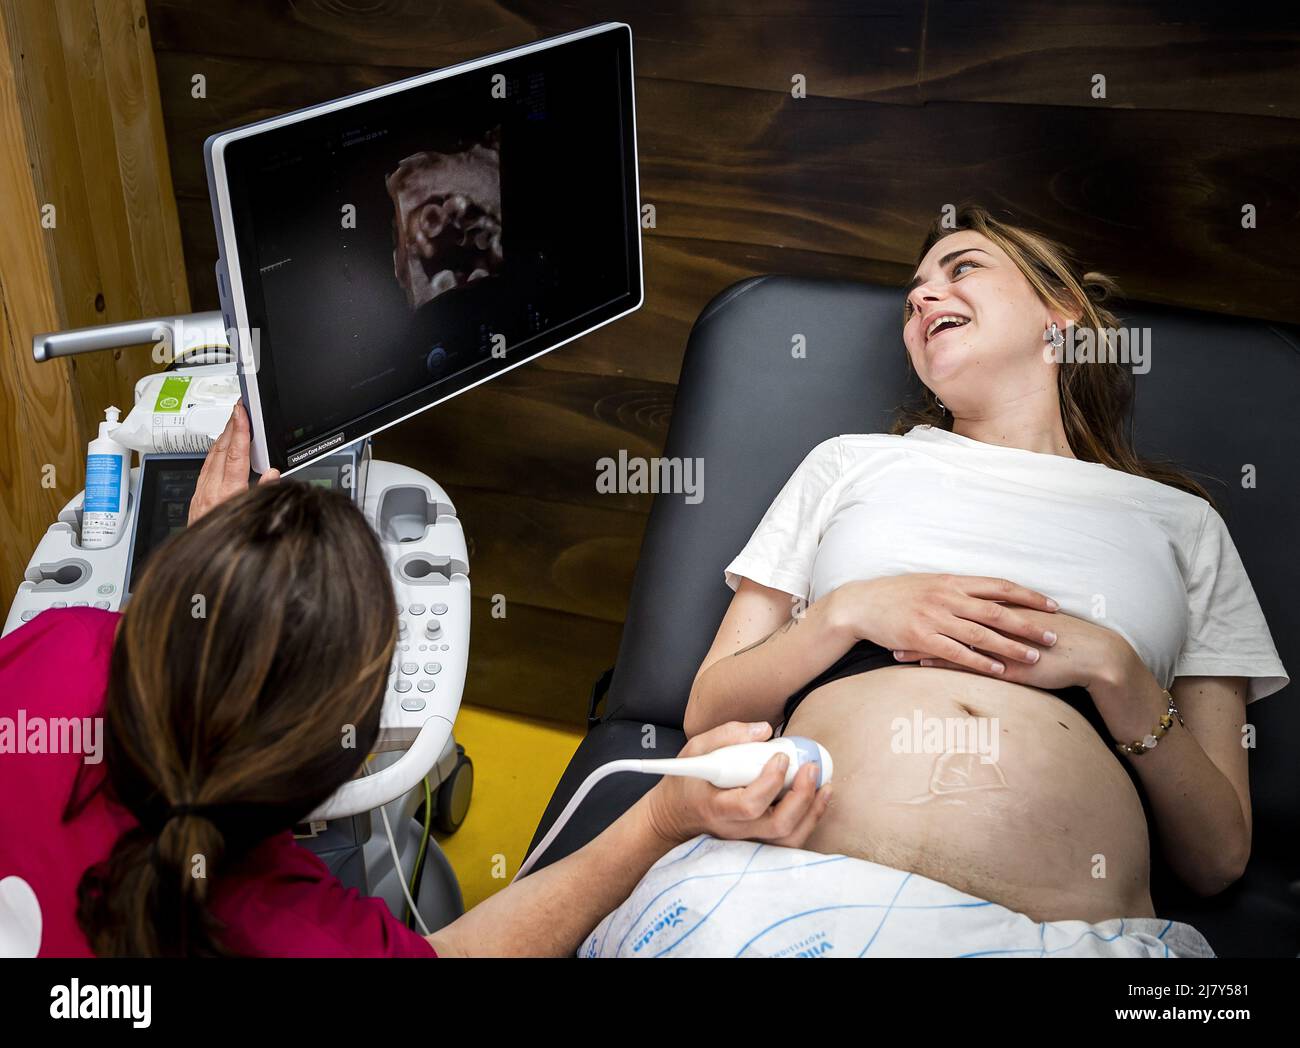 2022-05-11 14:48:35 AMSTERDAM - A pregnant visitor undergoes a fun ultrasound on the first day of the Nine Months Fair in the RAI. It is the first time since the outbreak of the corona pandemic that the fair on pregnancy and babies is taking place again. REMKO DE WAAL netherlands out - belgium out Stock Photo